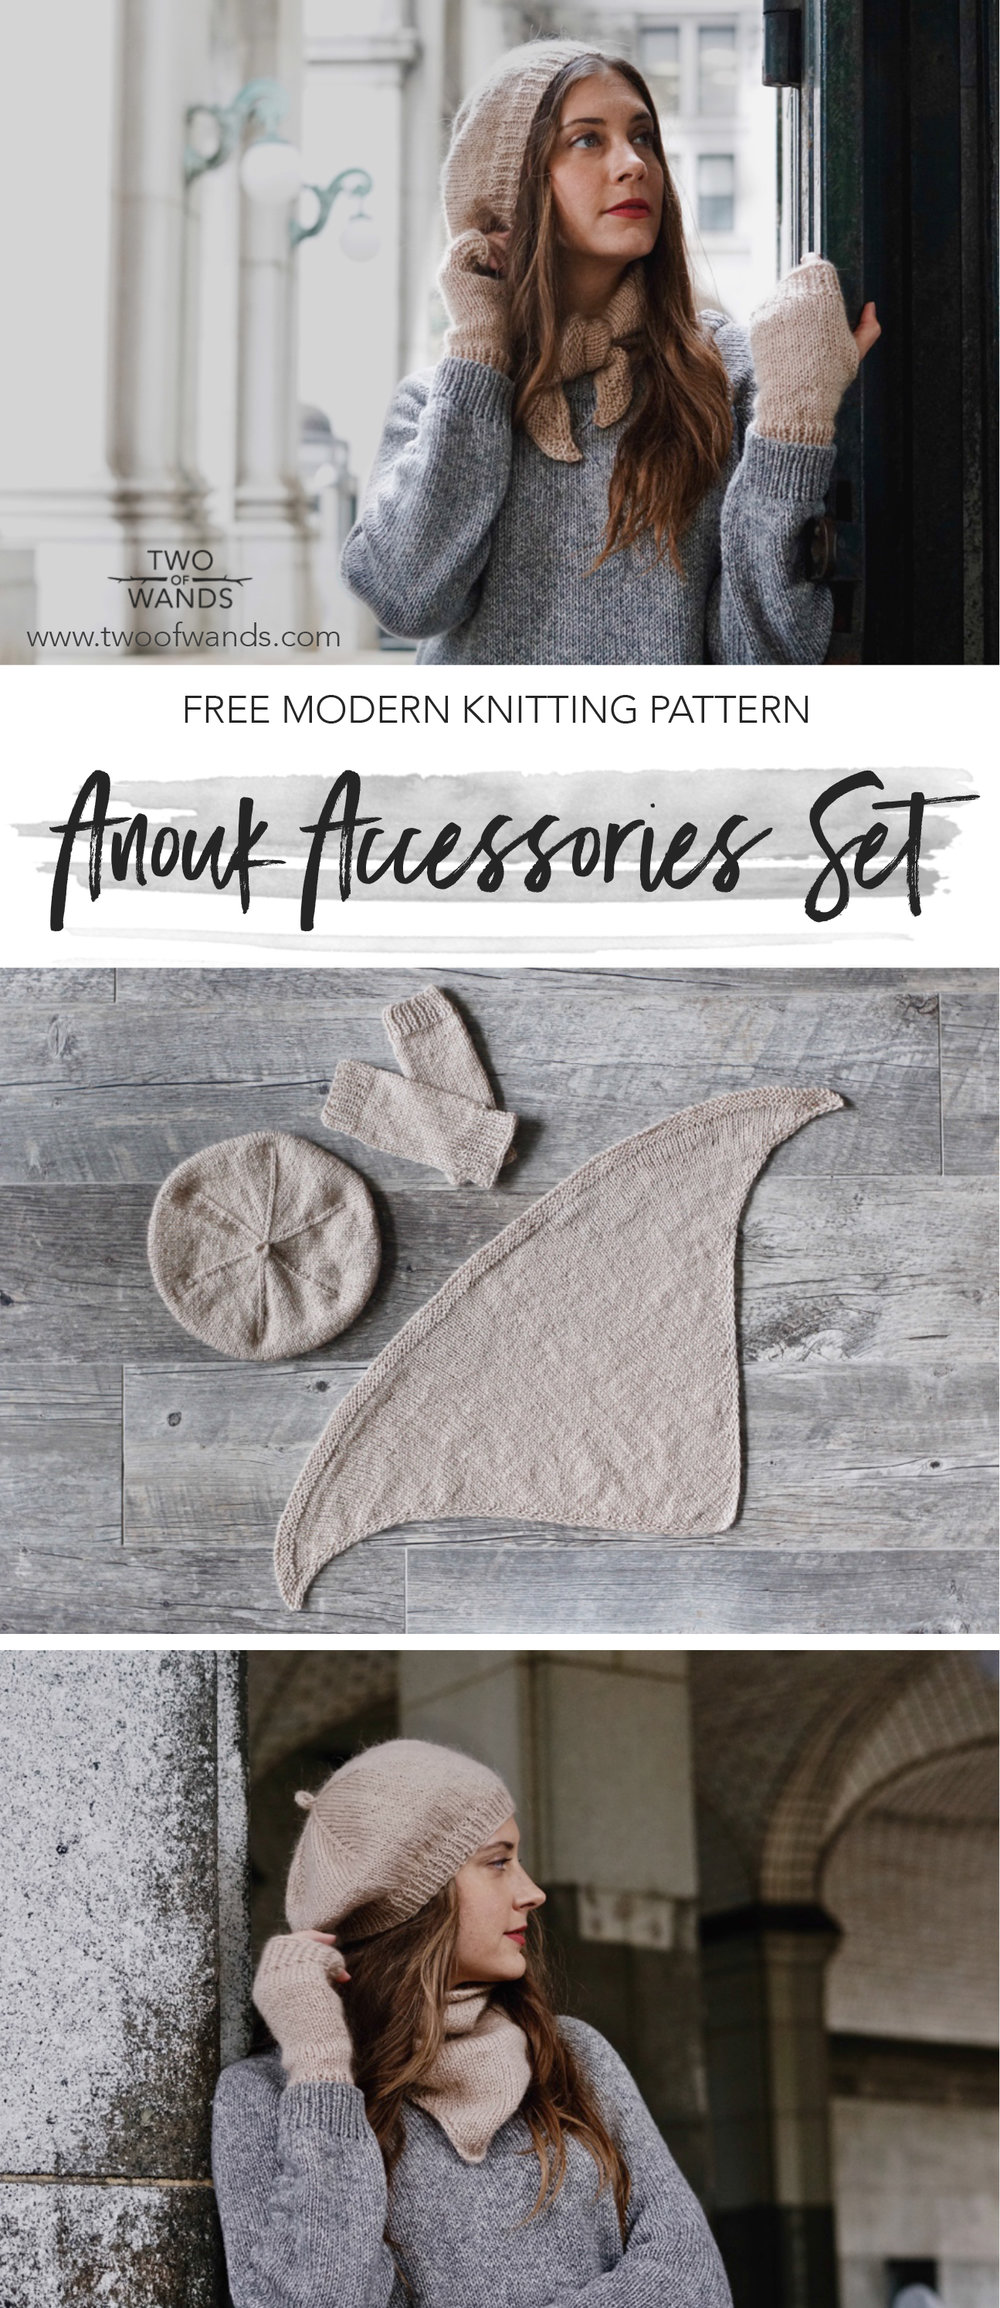 Anouk Accessories Set pattern by Two of Wands